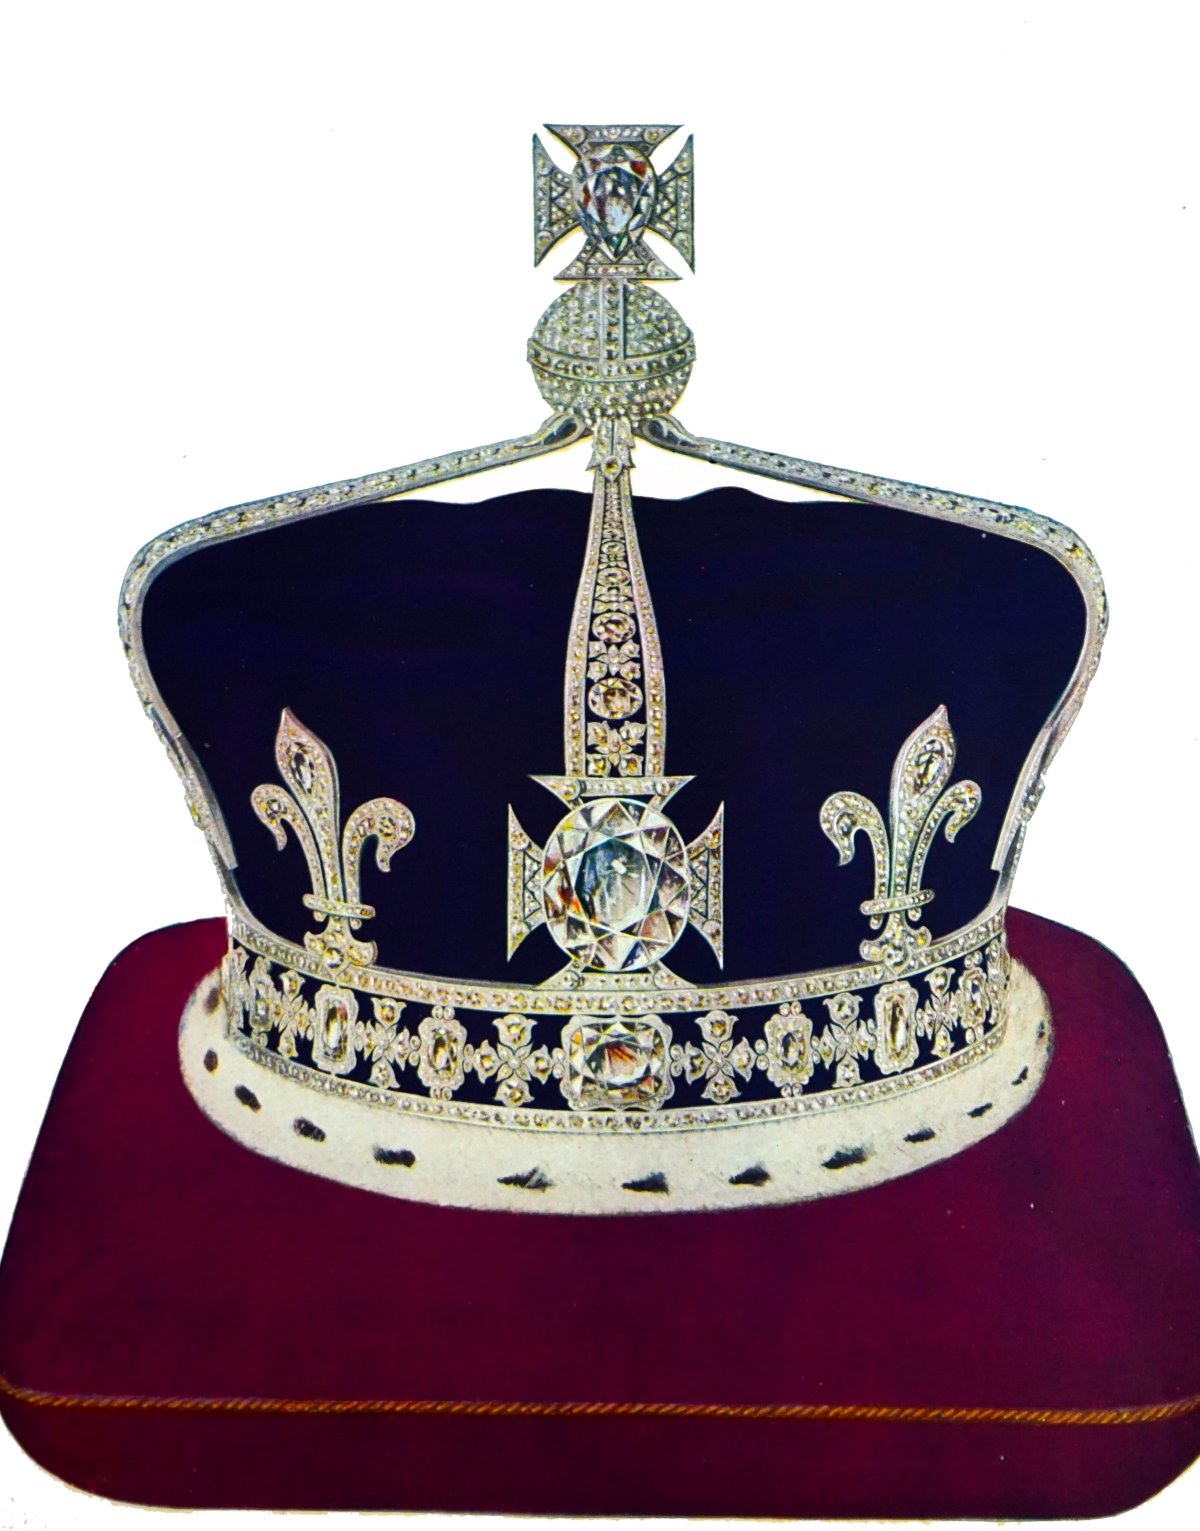 India to push for UK to hand over Koh-i-Noor diamond as part of